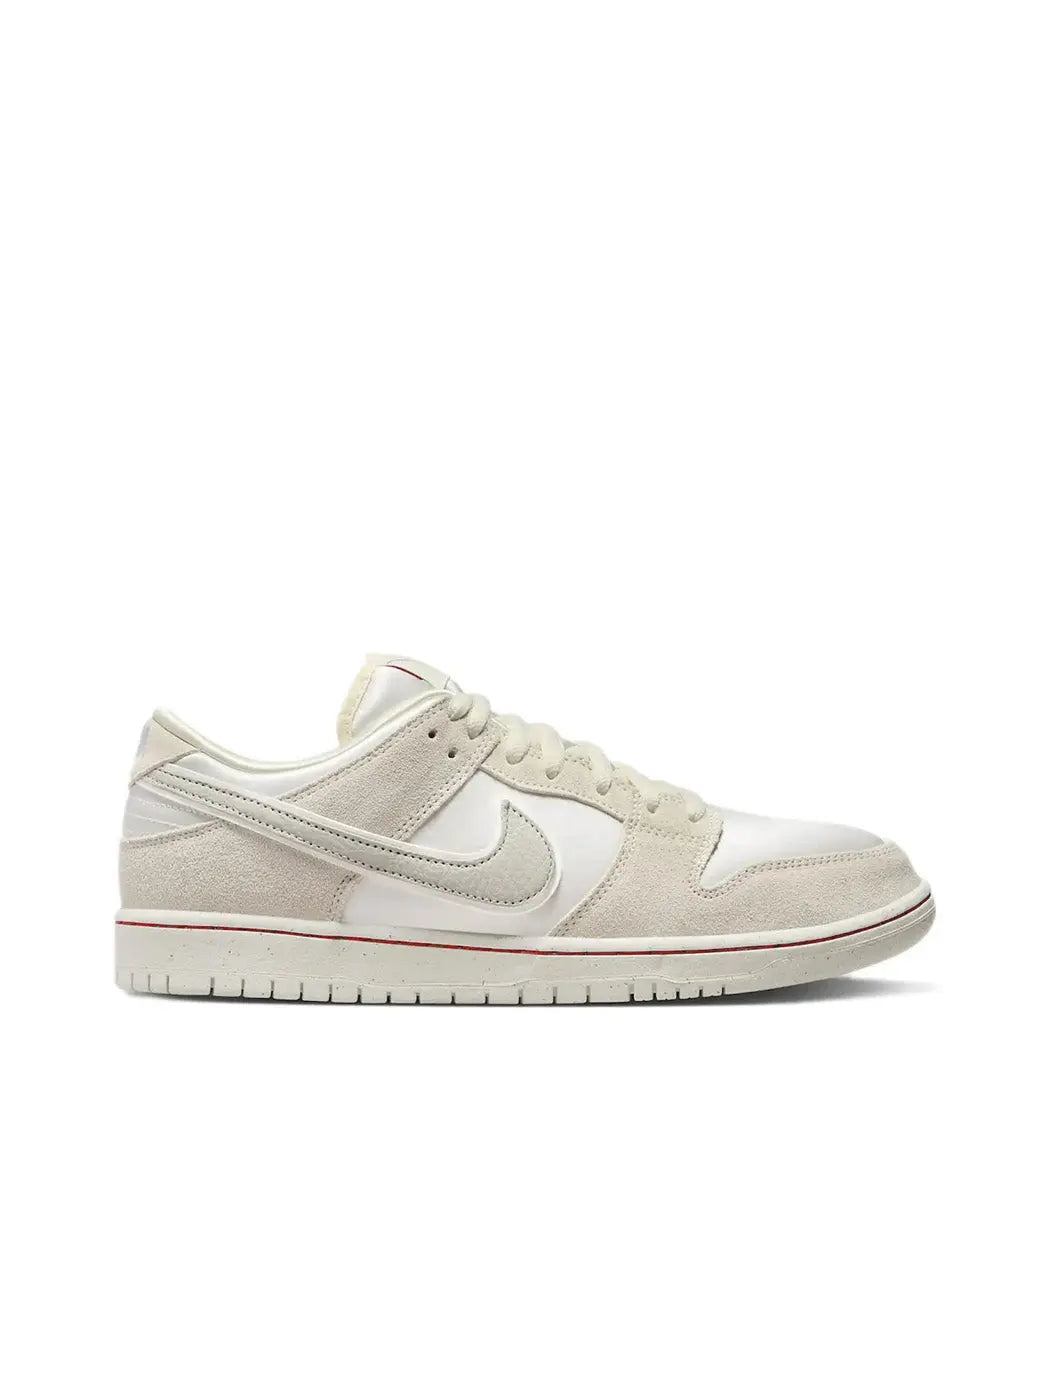 Nike SB Dunk Low City of Love Light Bone in Auckland, New Zealand - Shop name